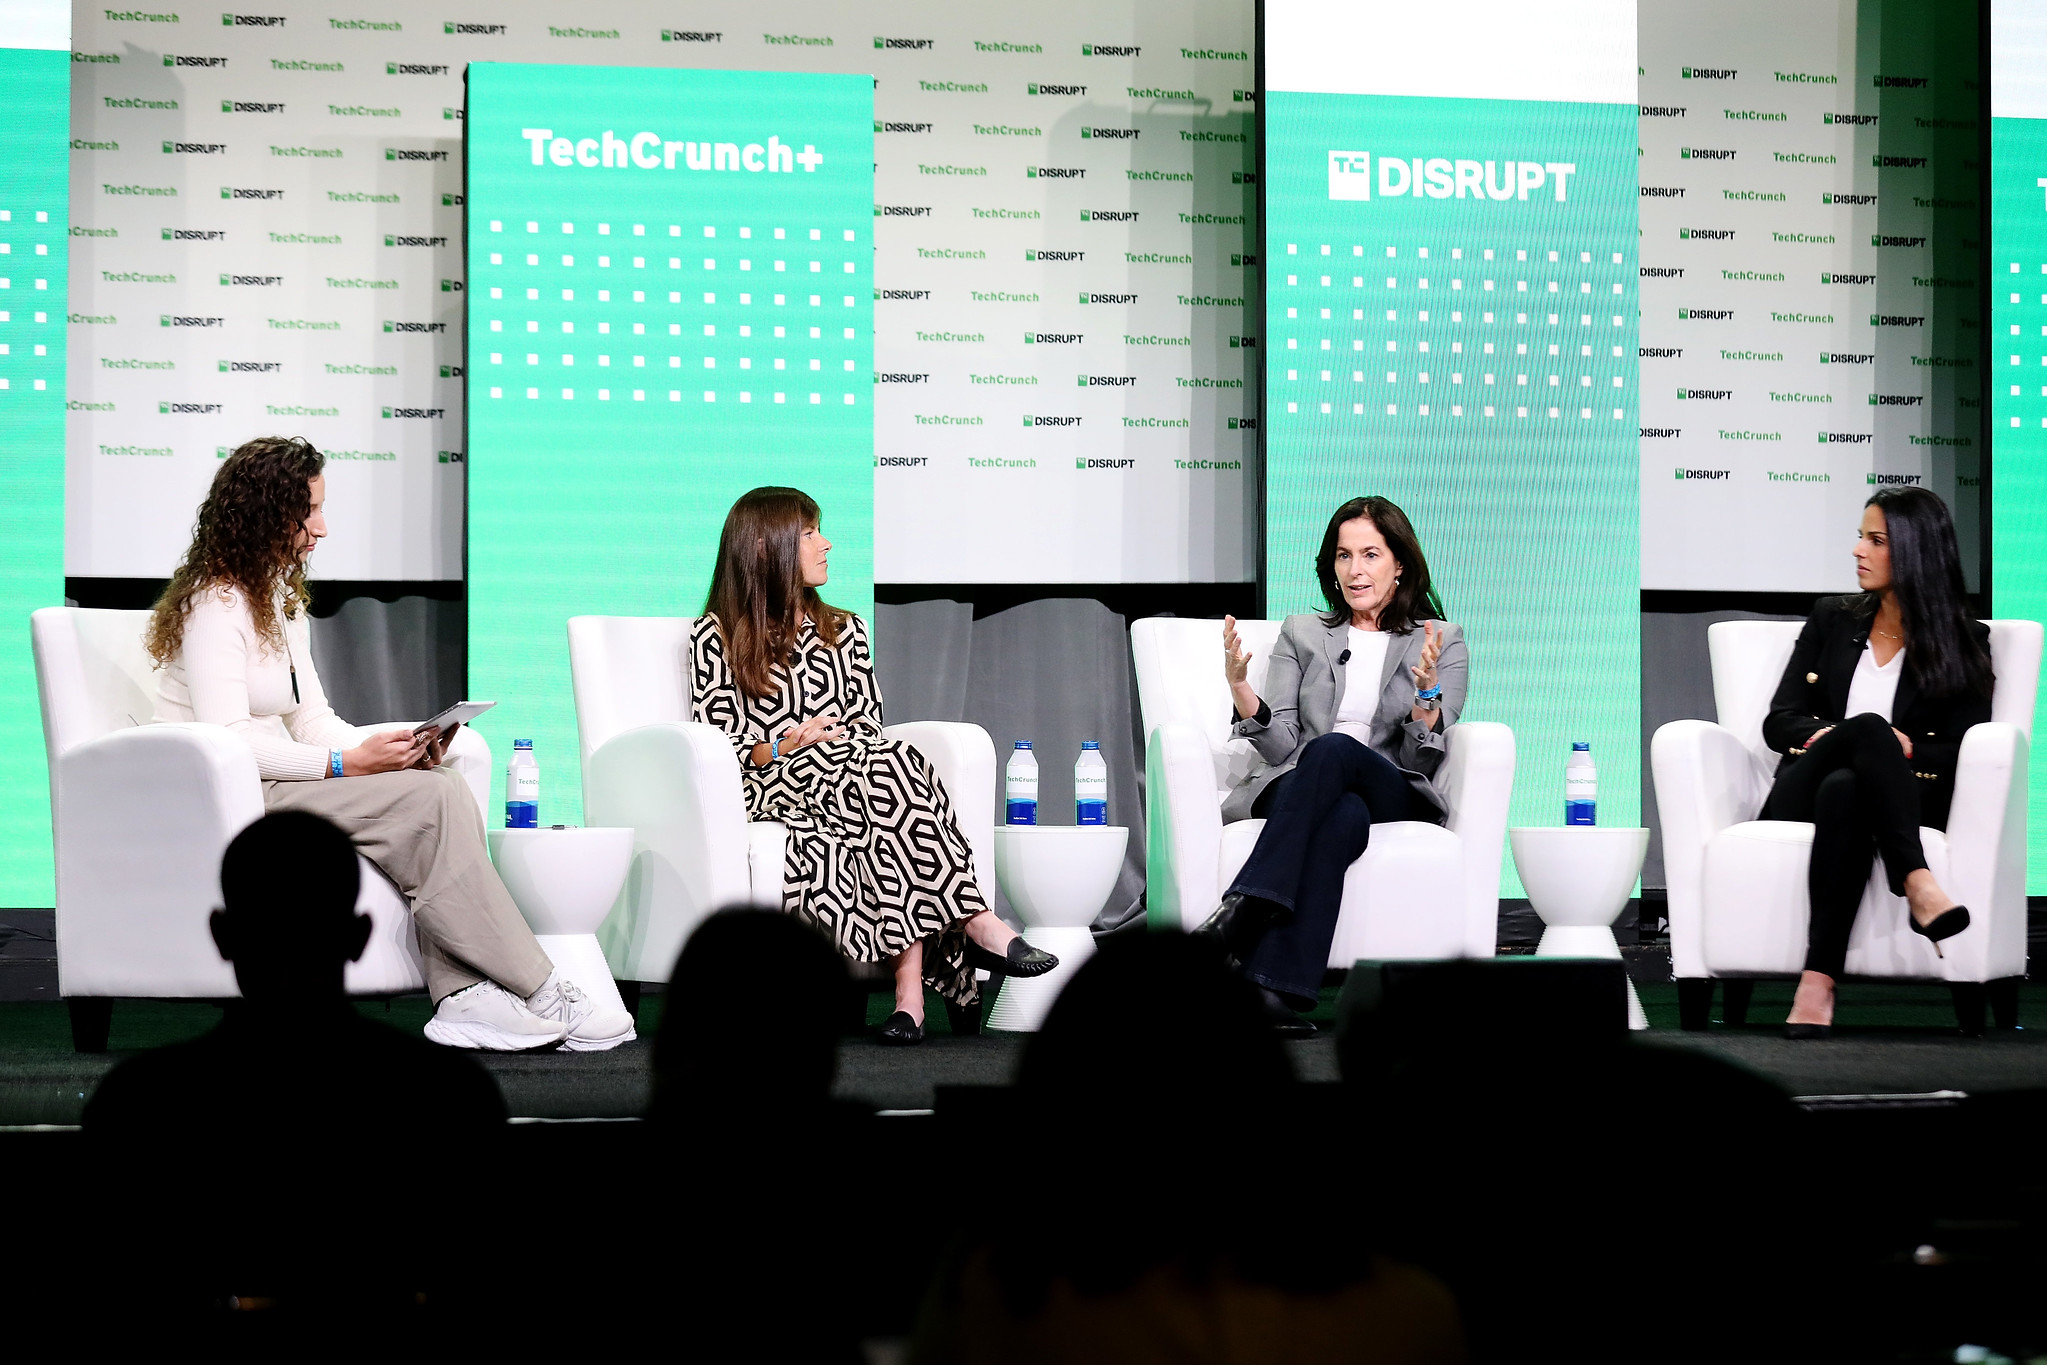 TechCrunch's Rebecca Bellan;  angel investor Allison Barr Allen of Trail Run Capital;  Deidre Paknad, co-founder and CEO of WorkBoard;  and Adriana Roche, CEO of MURAL, speaking on stage at TechCrunch Disrupt 2022.